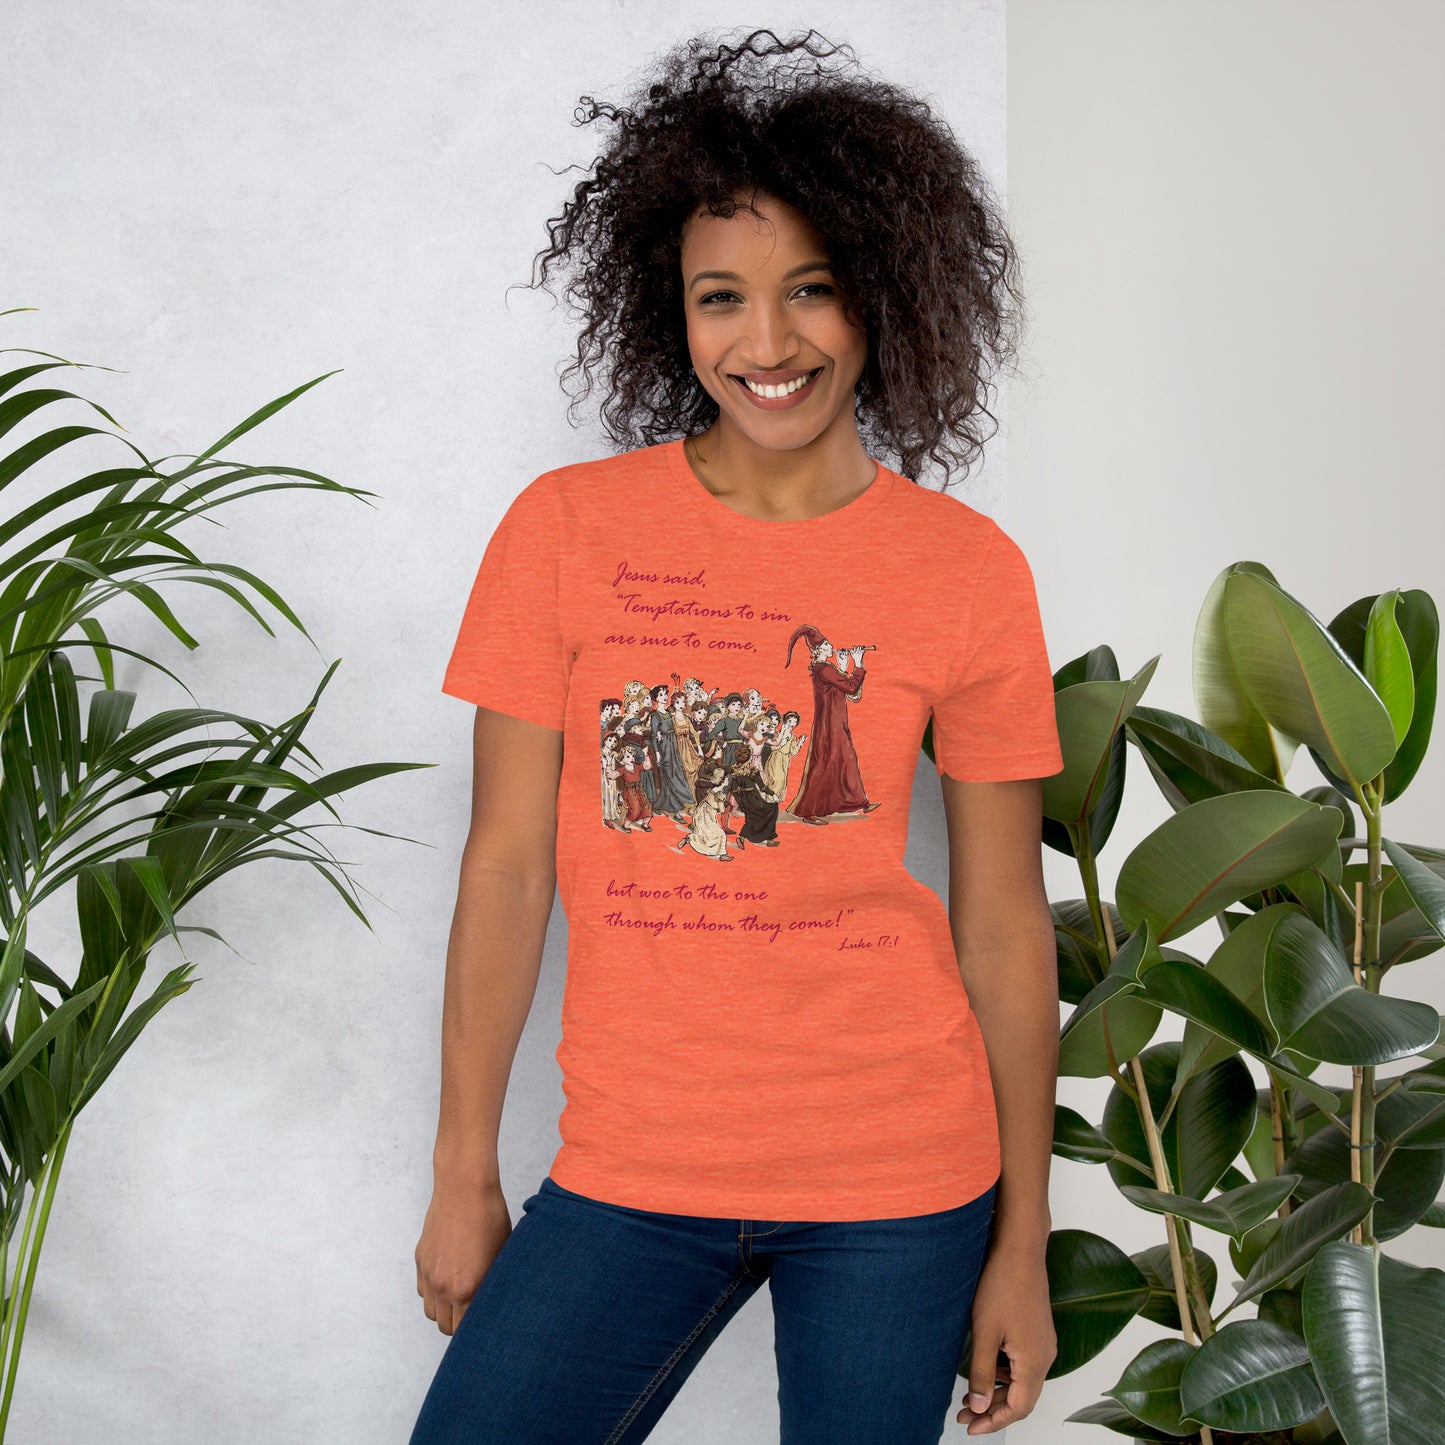 A007 T-shirt - Bella + Canvas 3001 Unisex T-shirt Featuring Luke 17:1 With a Graphic Depiction of the Pied Piper Leading a Mesmerized Crowd.